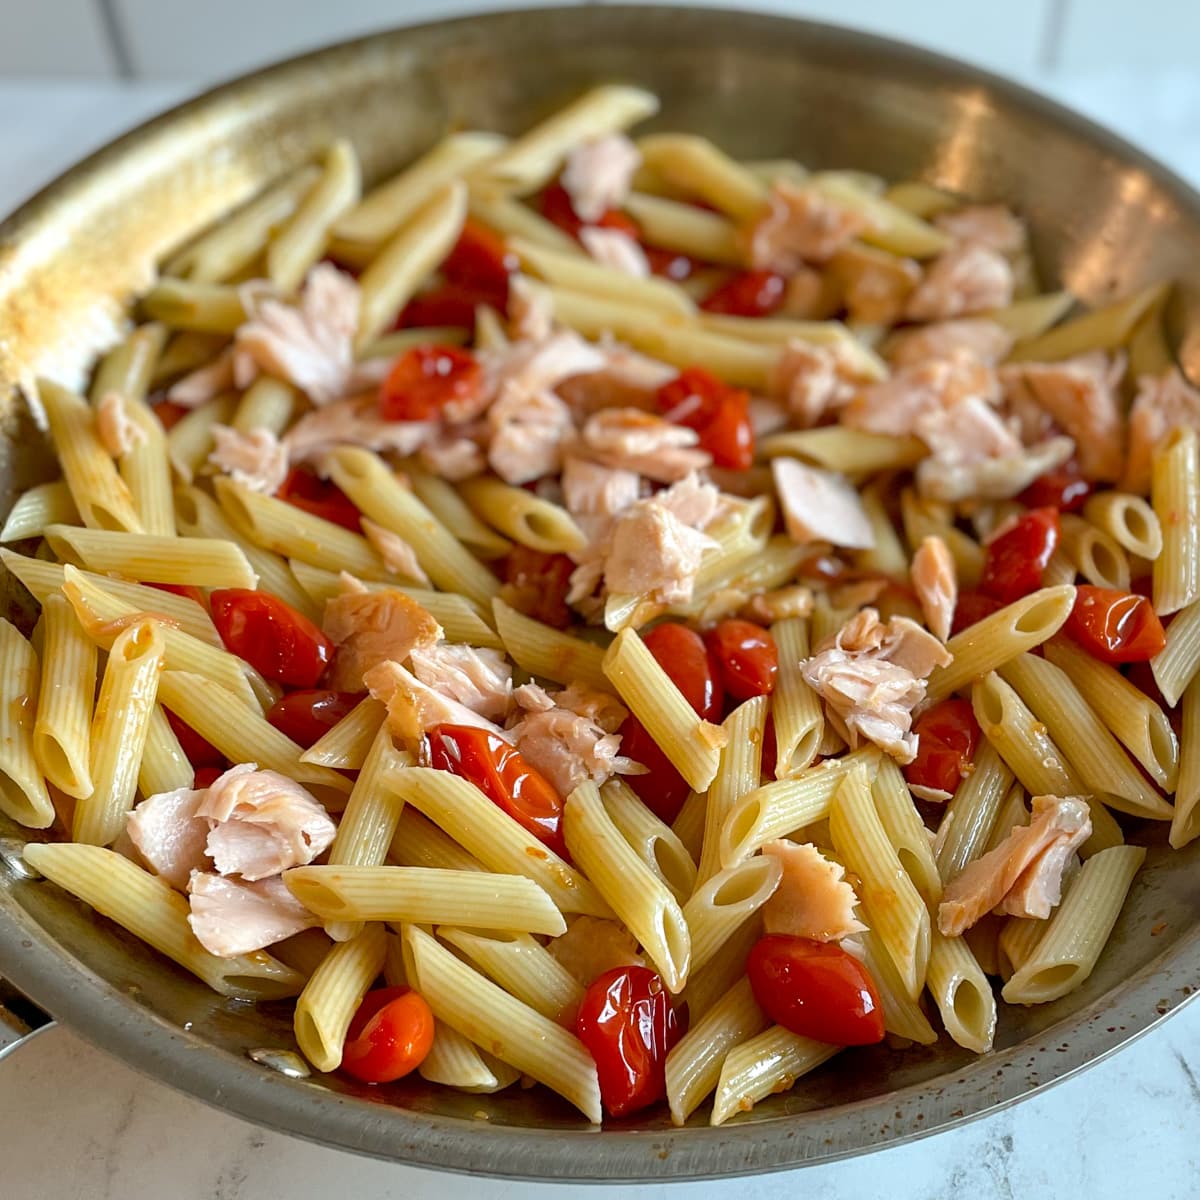 Penne pasta mixed with flaked salmon and burst cherry tomatoes in a stainless steel pan over a white marble countertop.